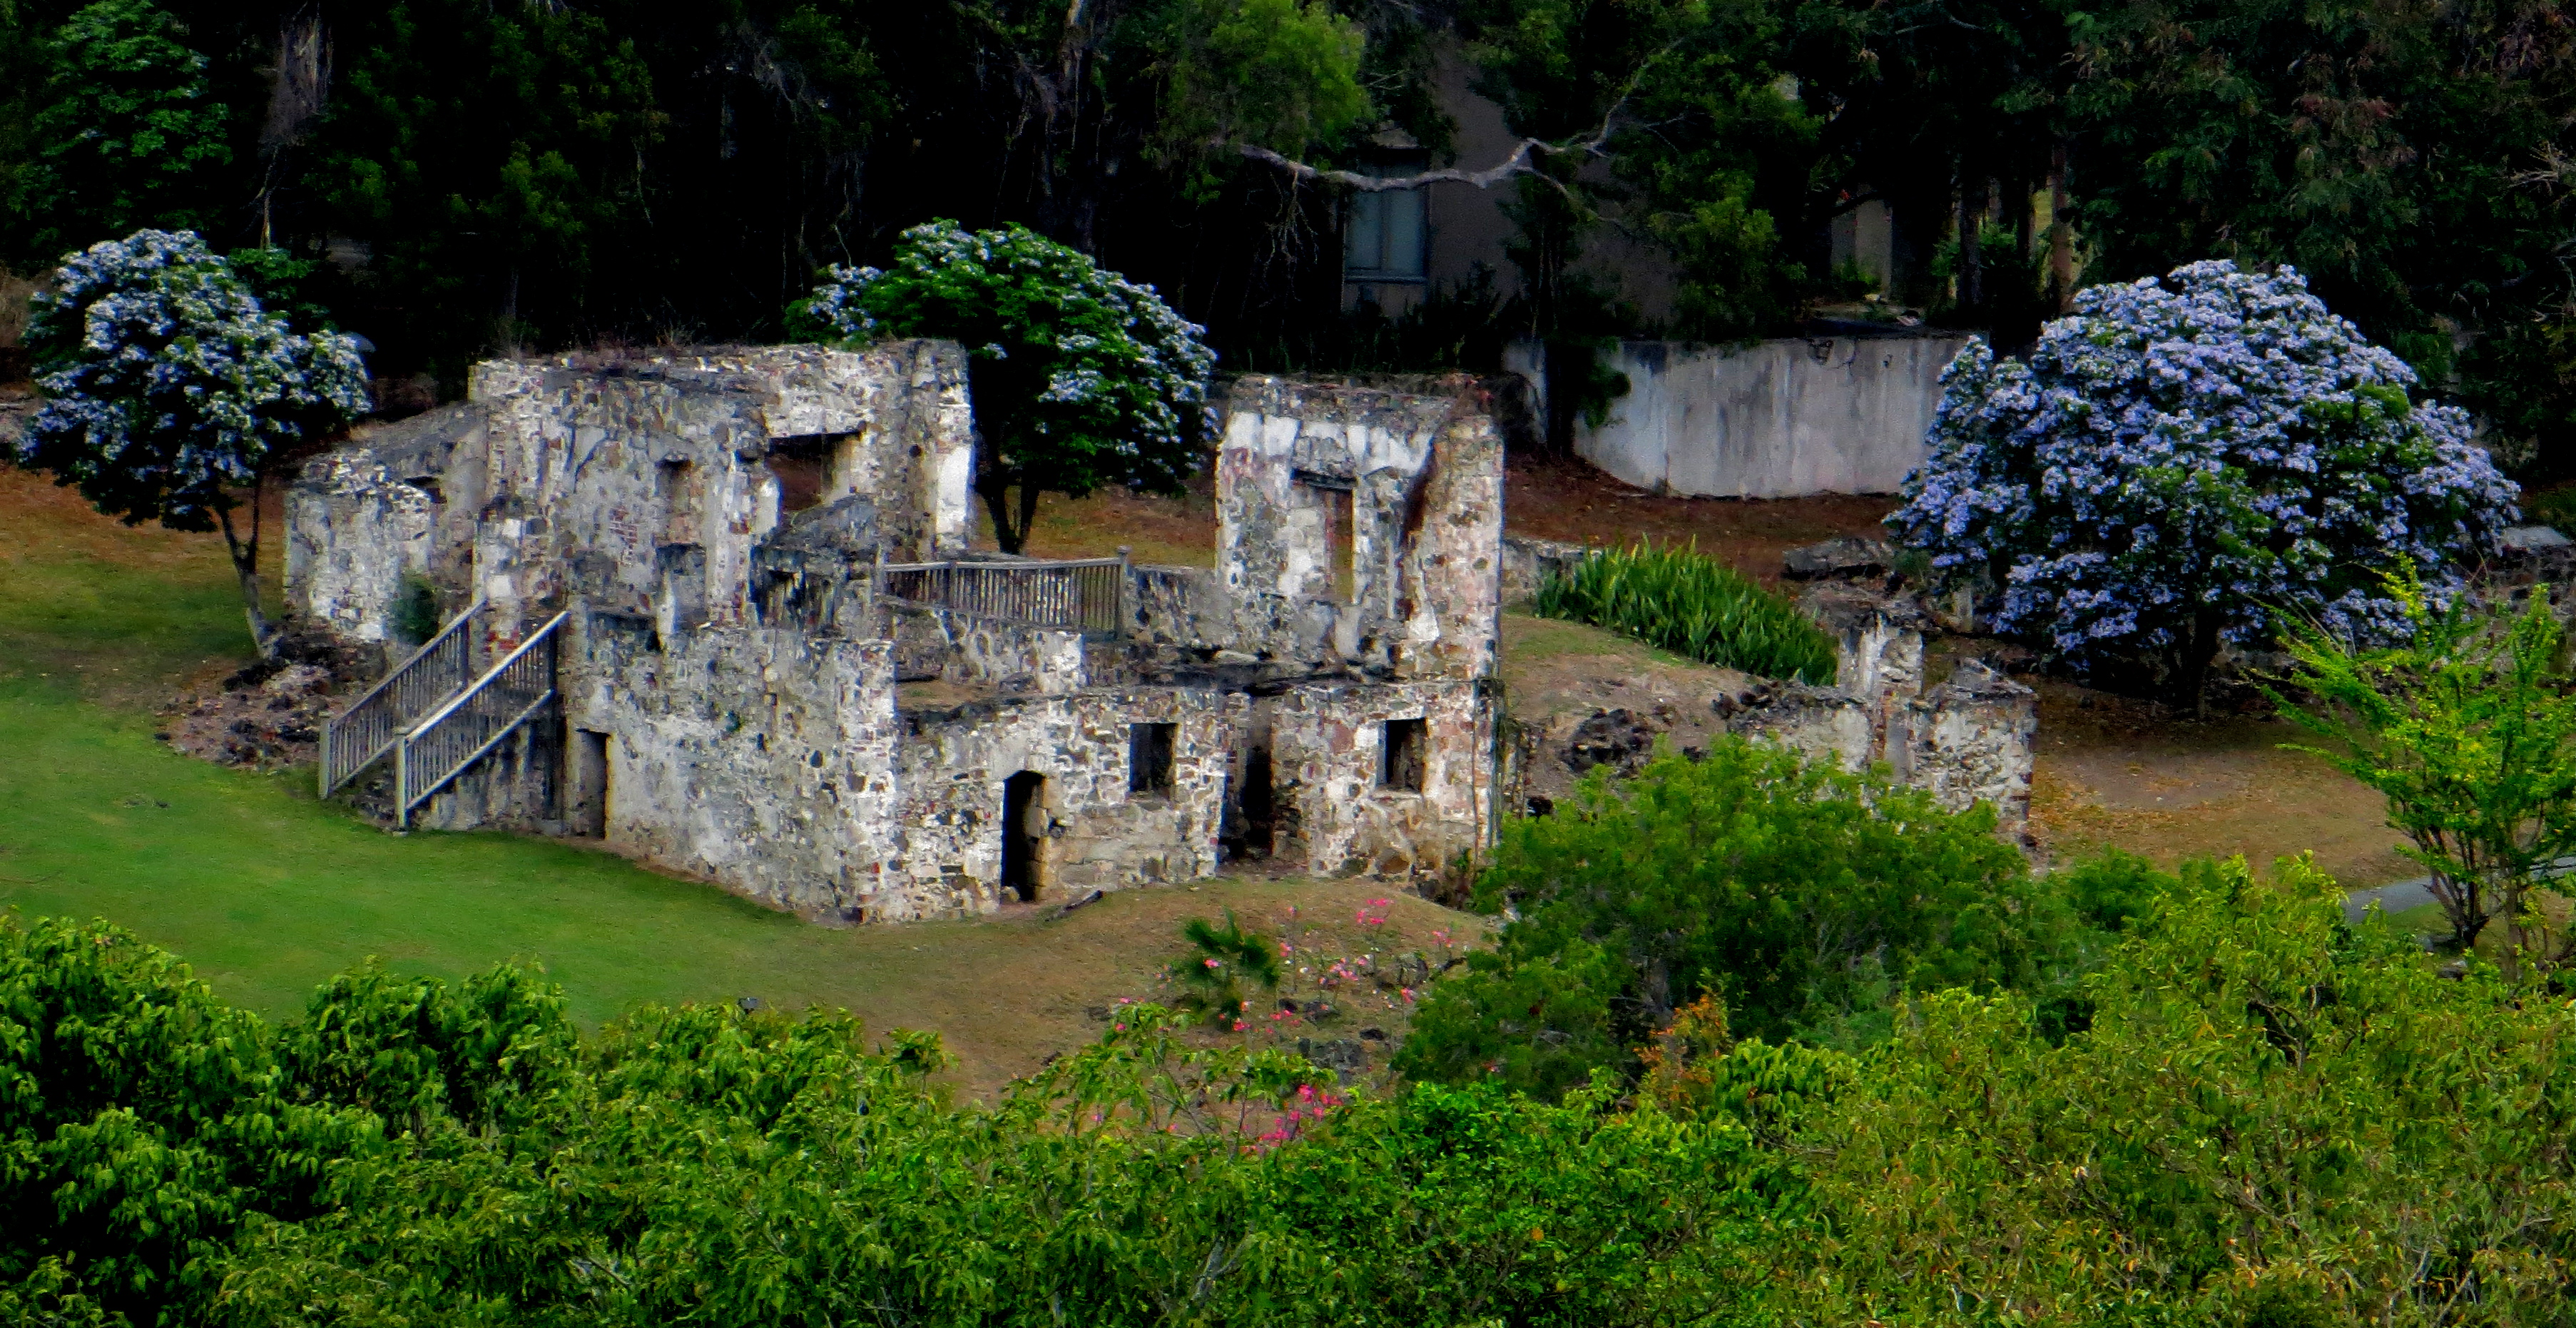 The ruins of the estate house at Caneel Bay stands among the greenery of lignum vitae trees blooming with purple flowers